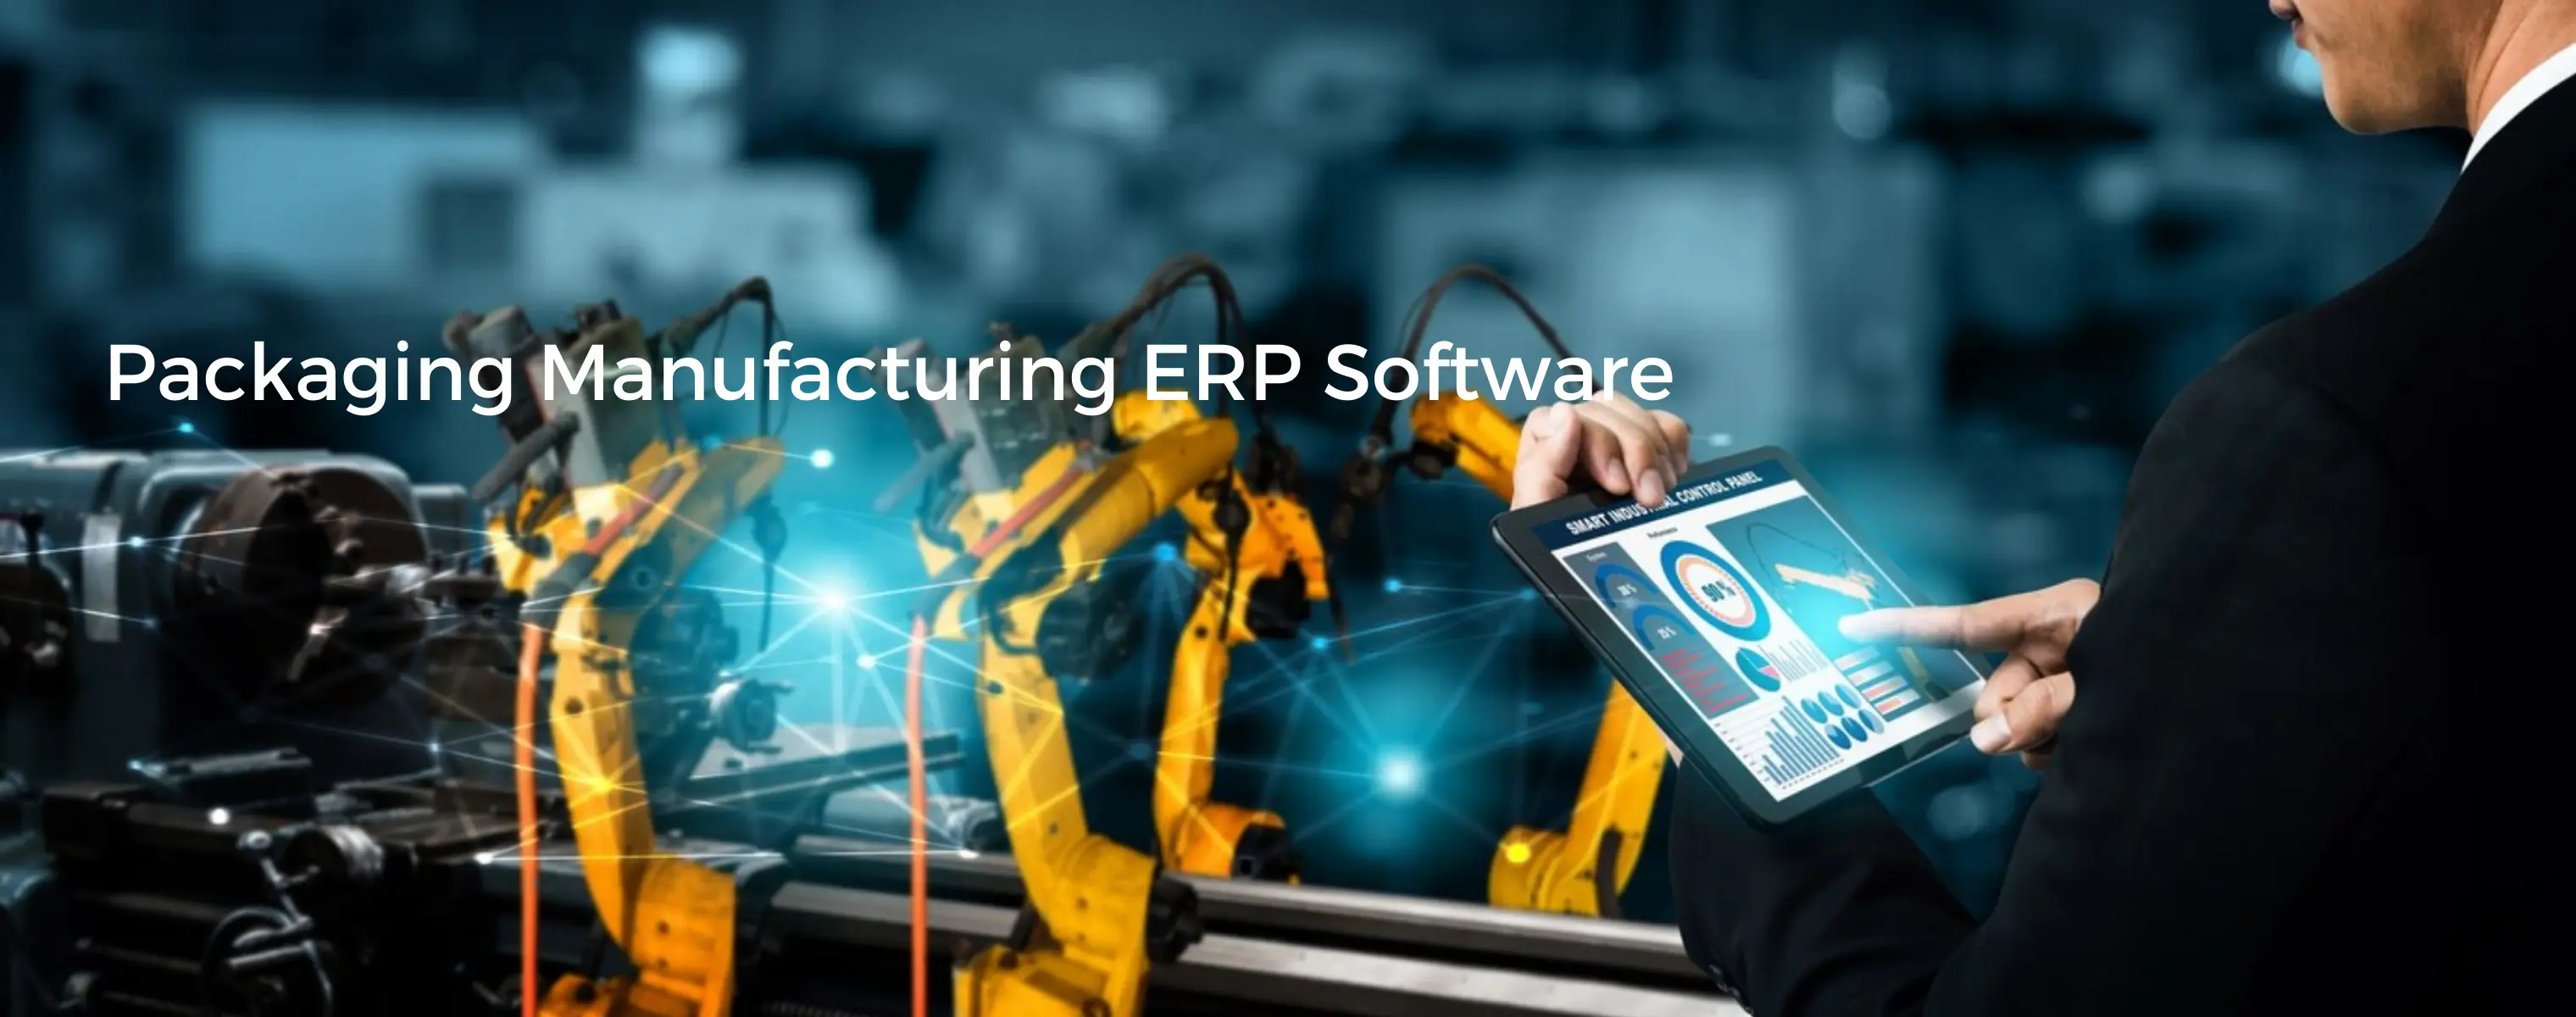 Packaging-Manufacturing-ERP-Software